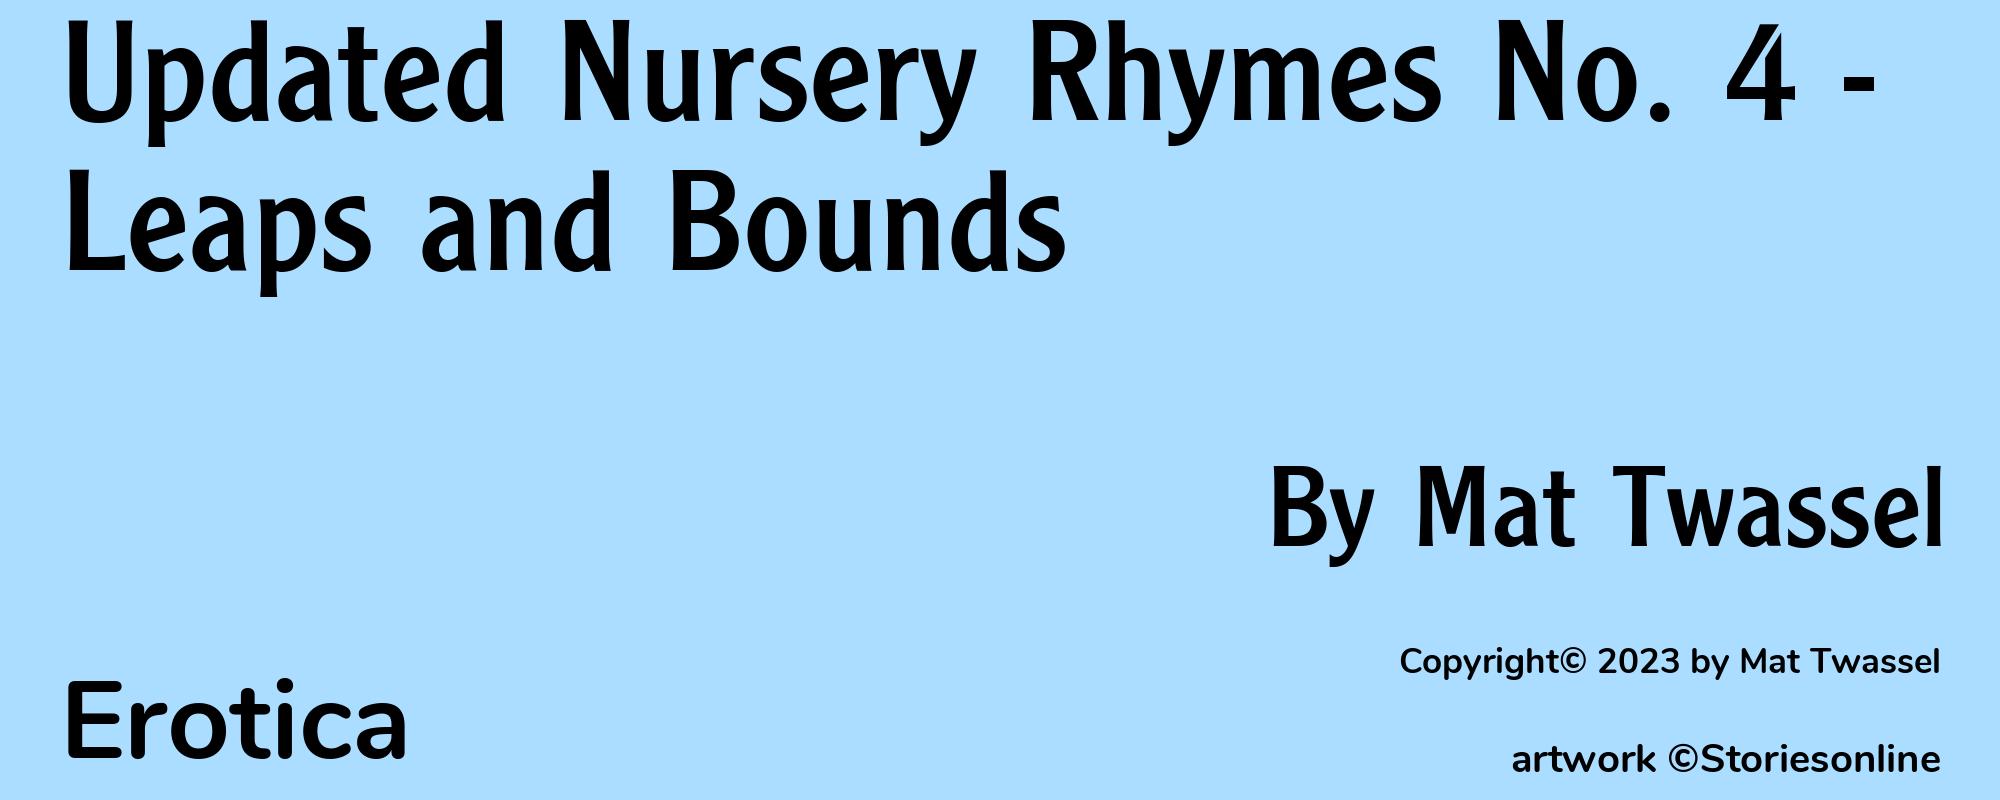 Updated Nursery Rhymes No. 4 - Leaps and Bounds - Cover